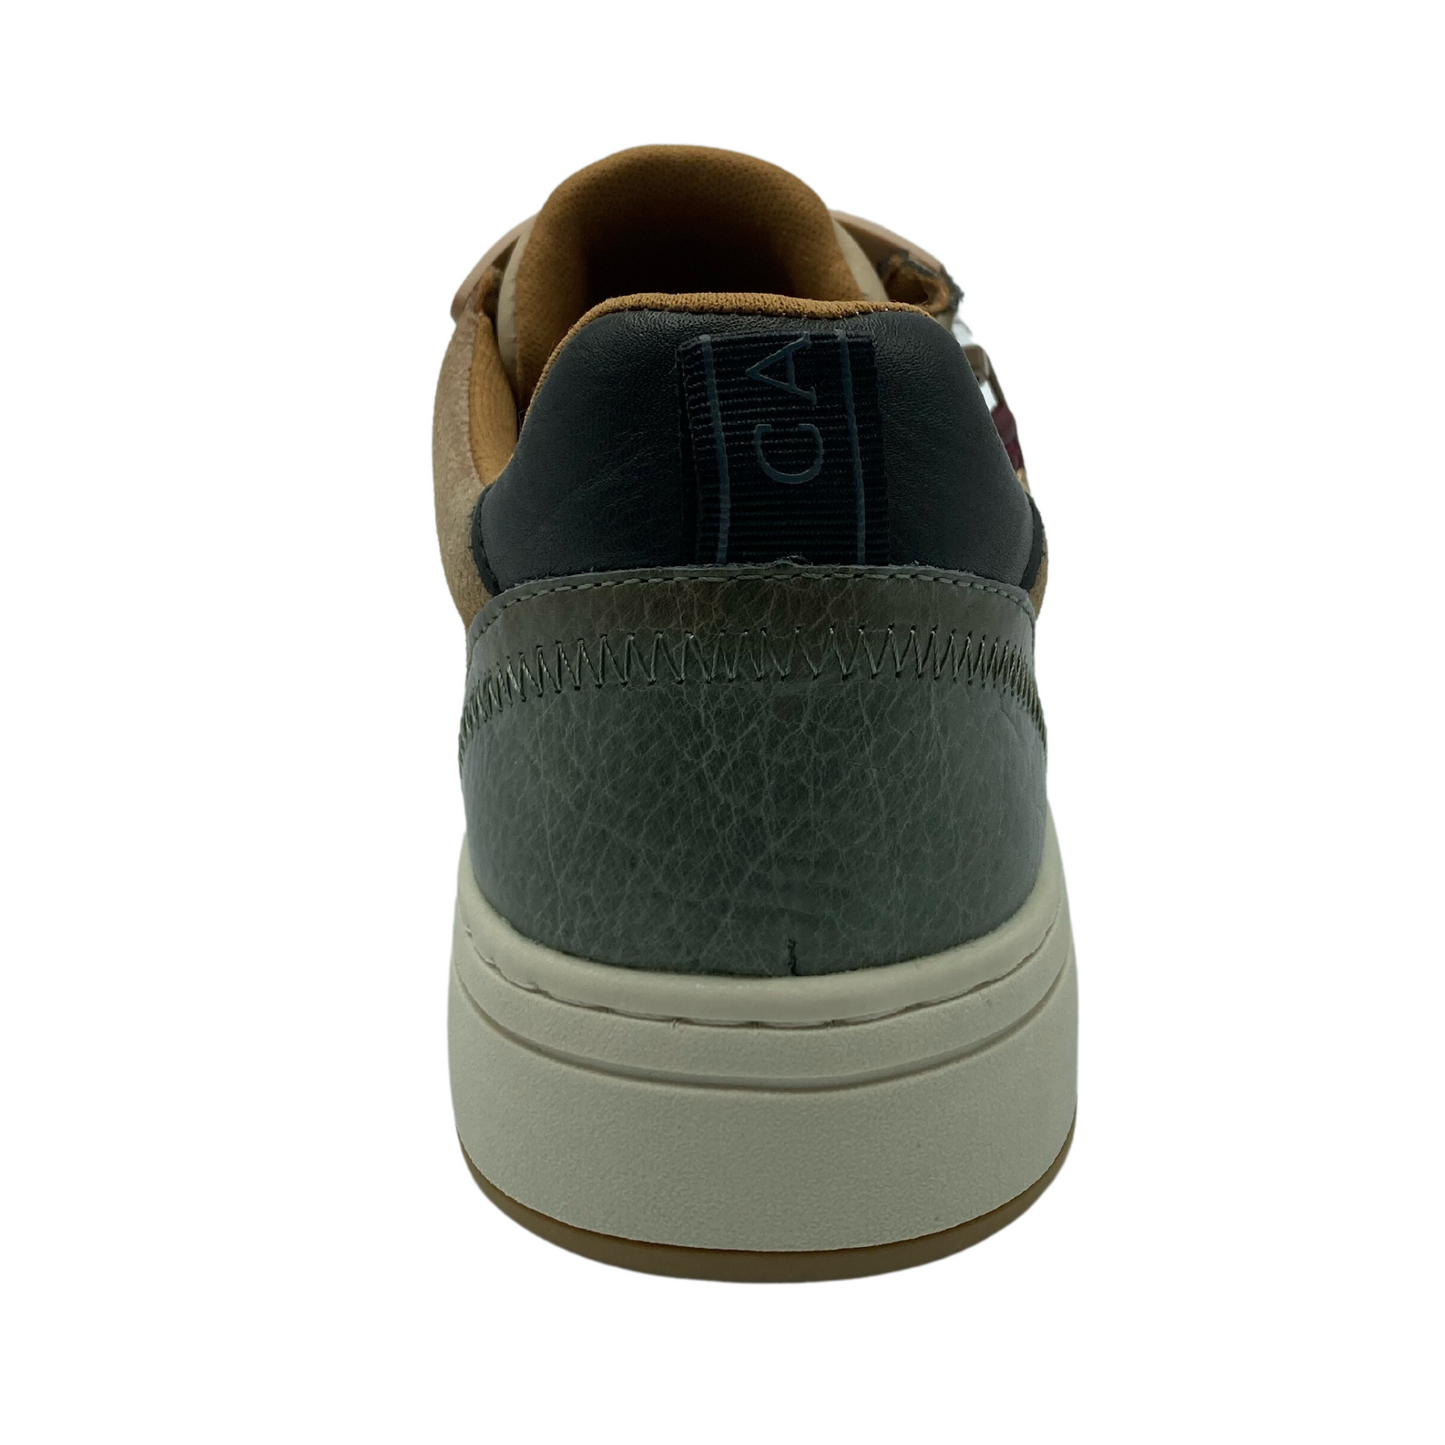 Back view of leather sneaker with white rubber outsole